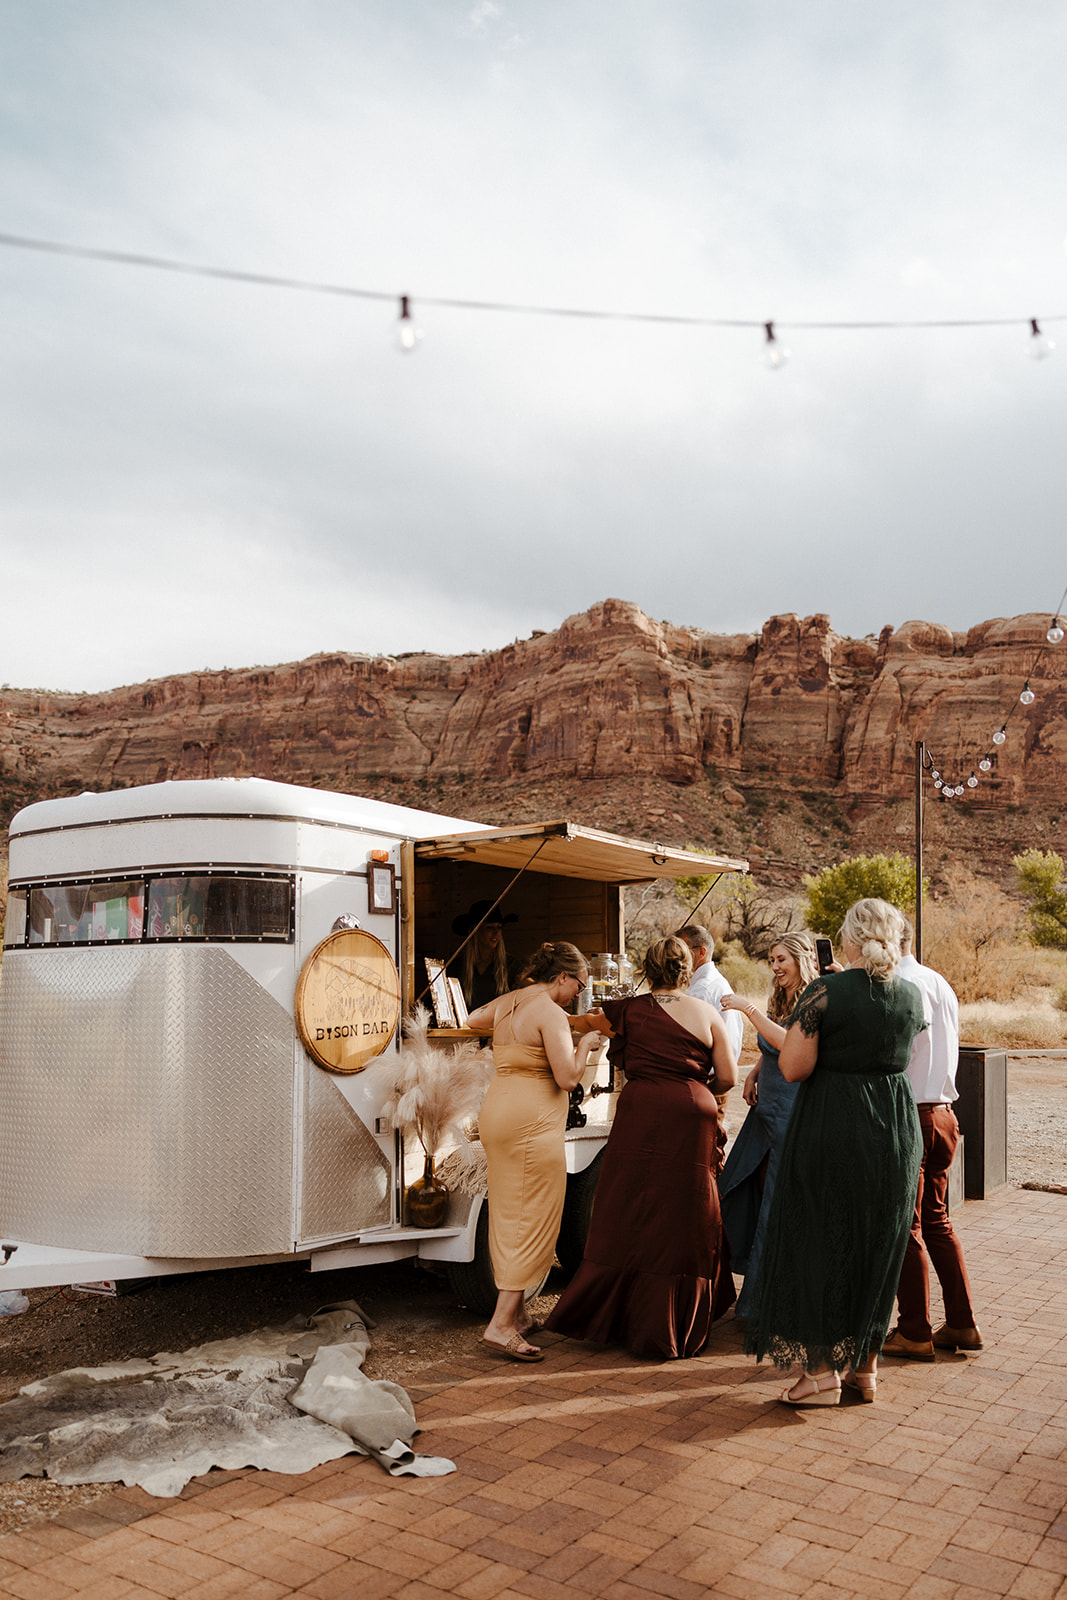 guests mingle as they wait at the mobile bar for their drinks